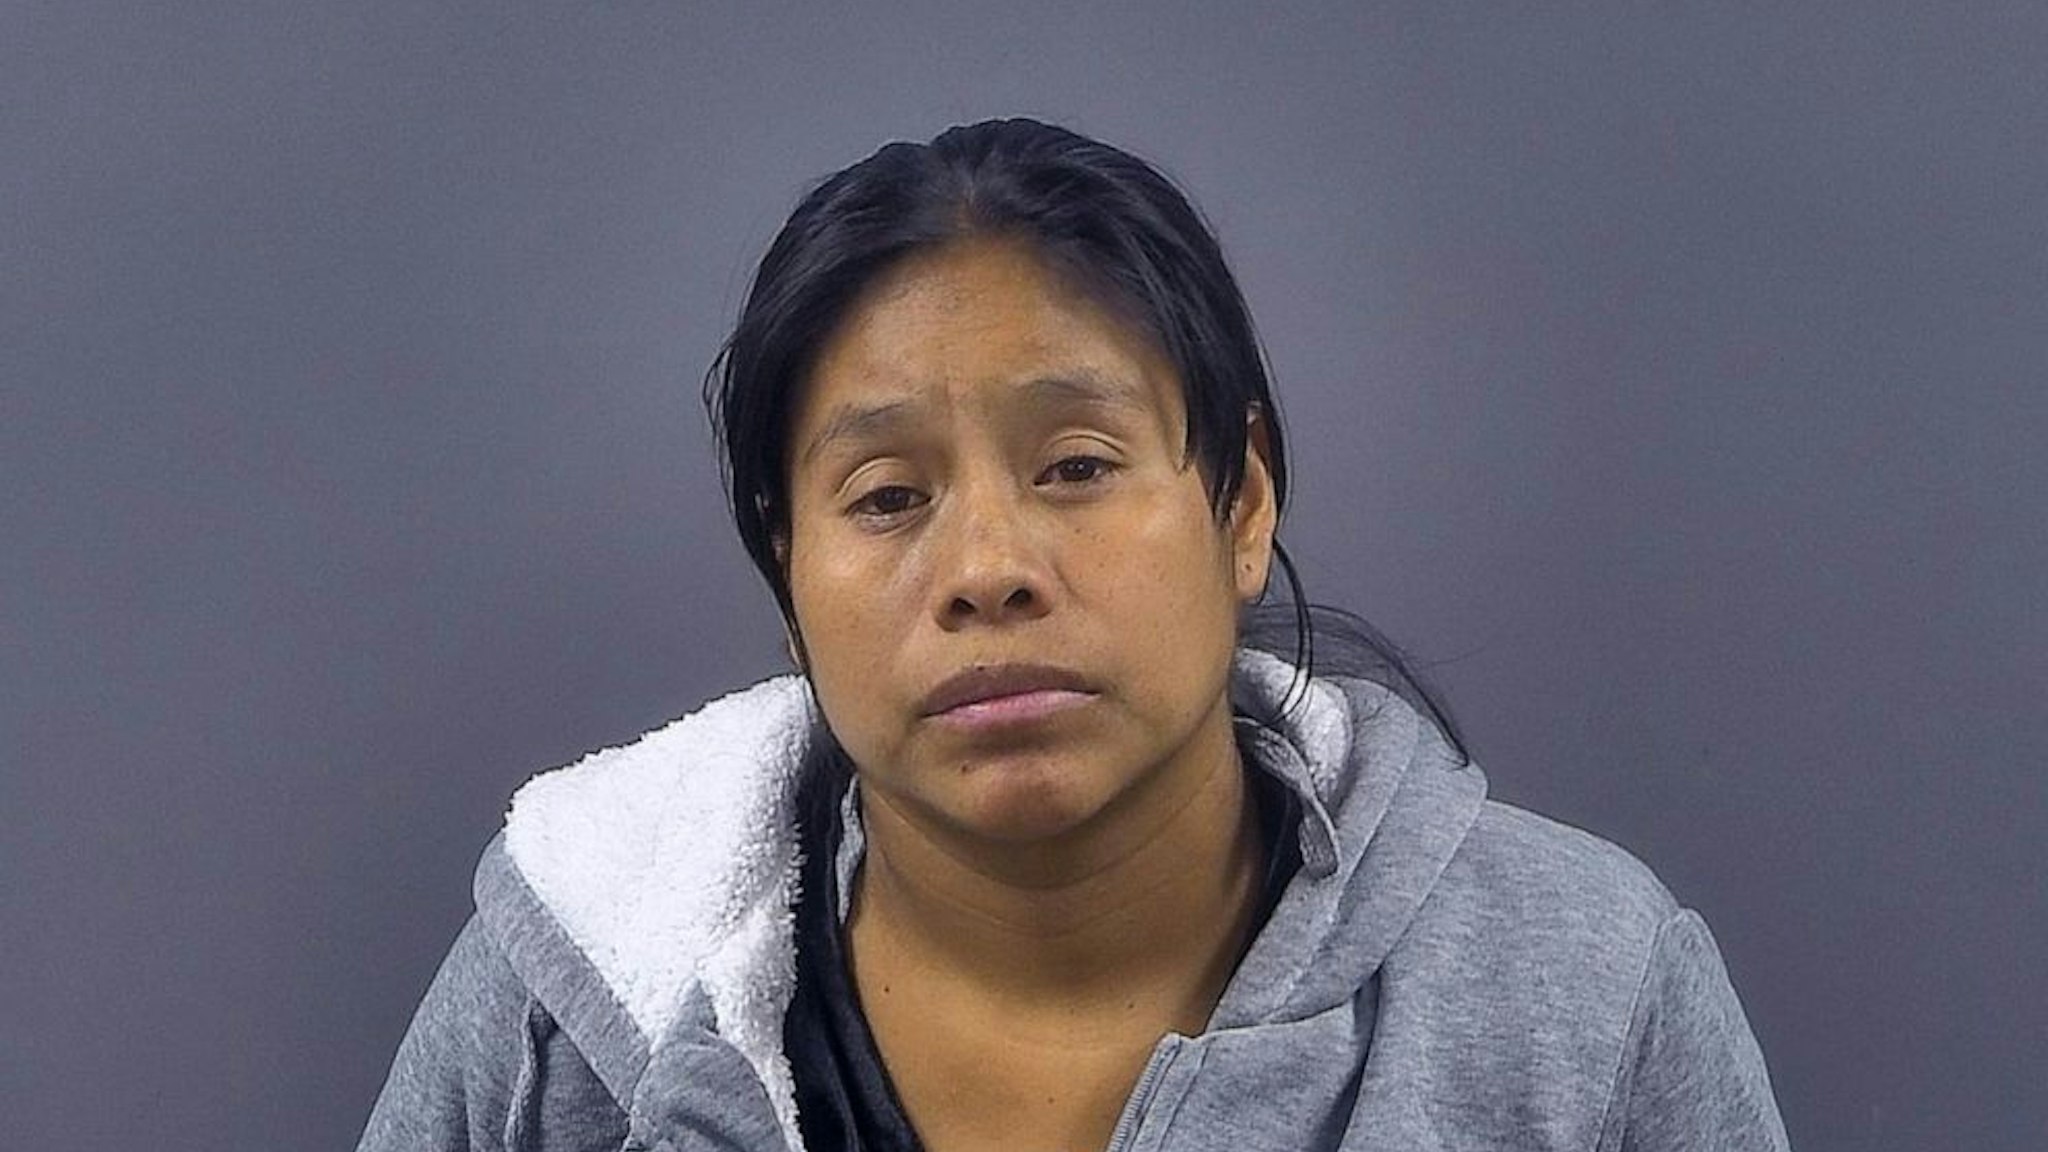 Maria Domingo Perez, 31, was arrested for selling her baby for $2,000.